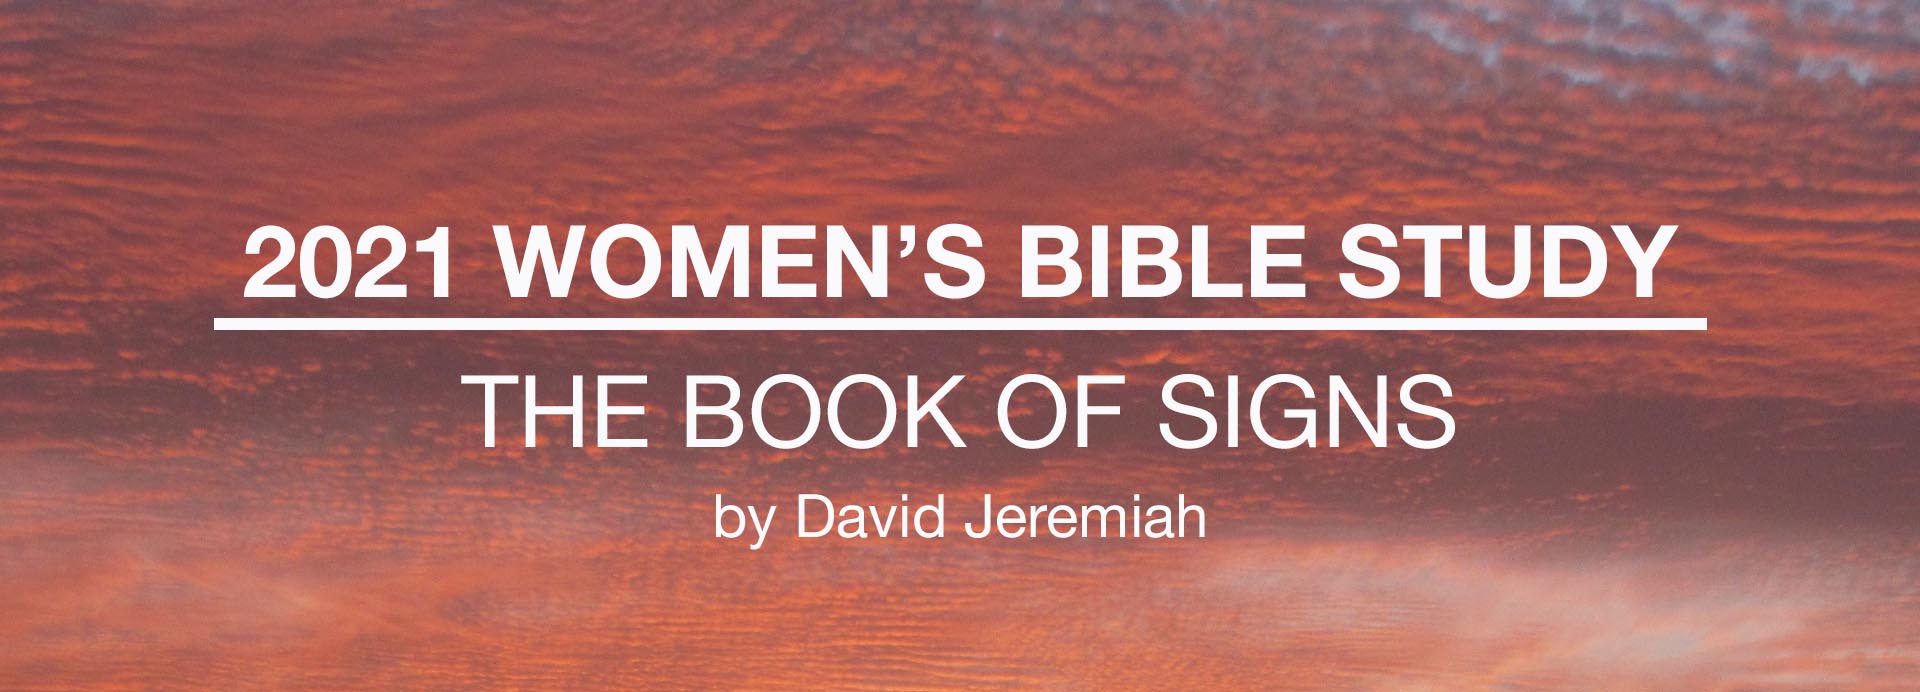 Women's Bible Study: The Book of Signs